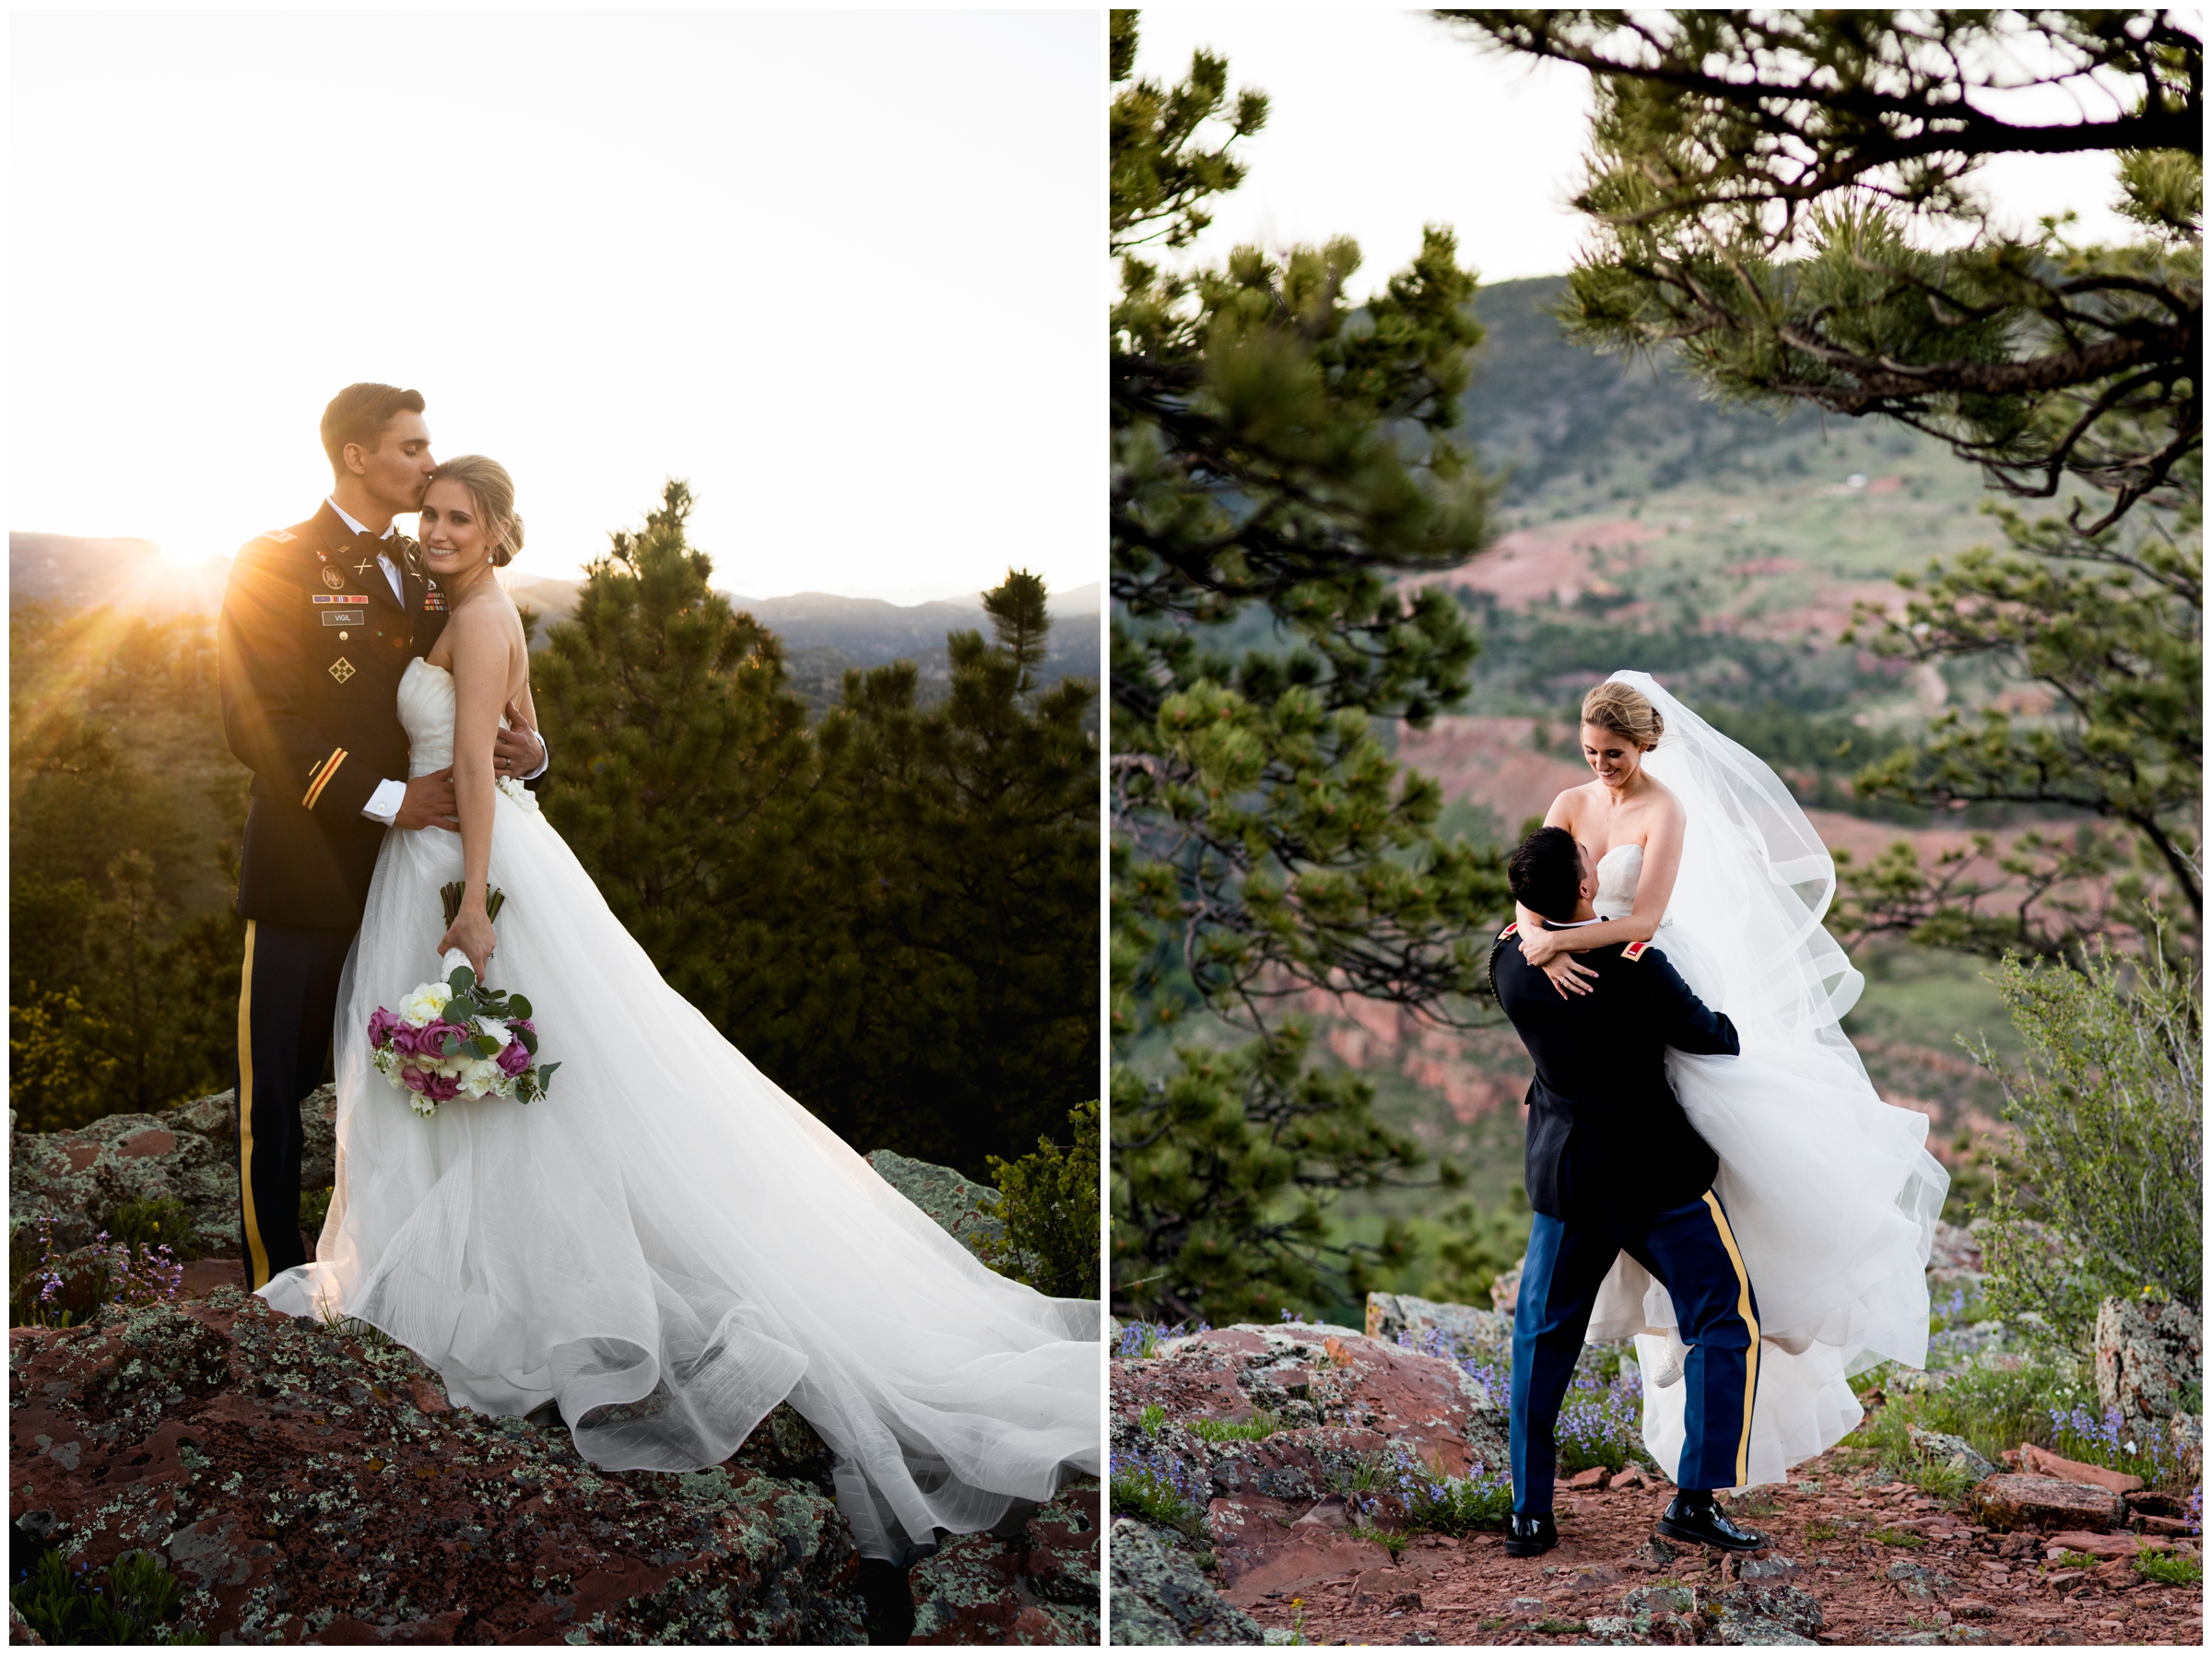 groom lifting bride during Colorado mountain wedding portraits at Lionscrest Manor